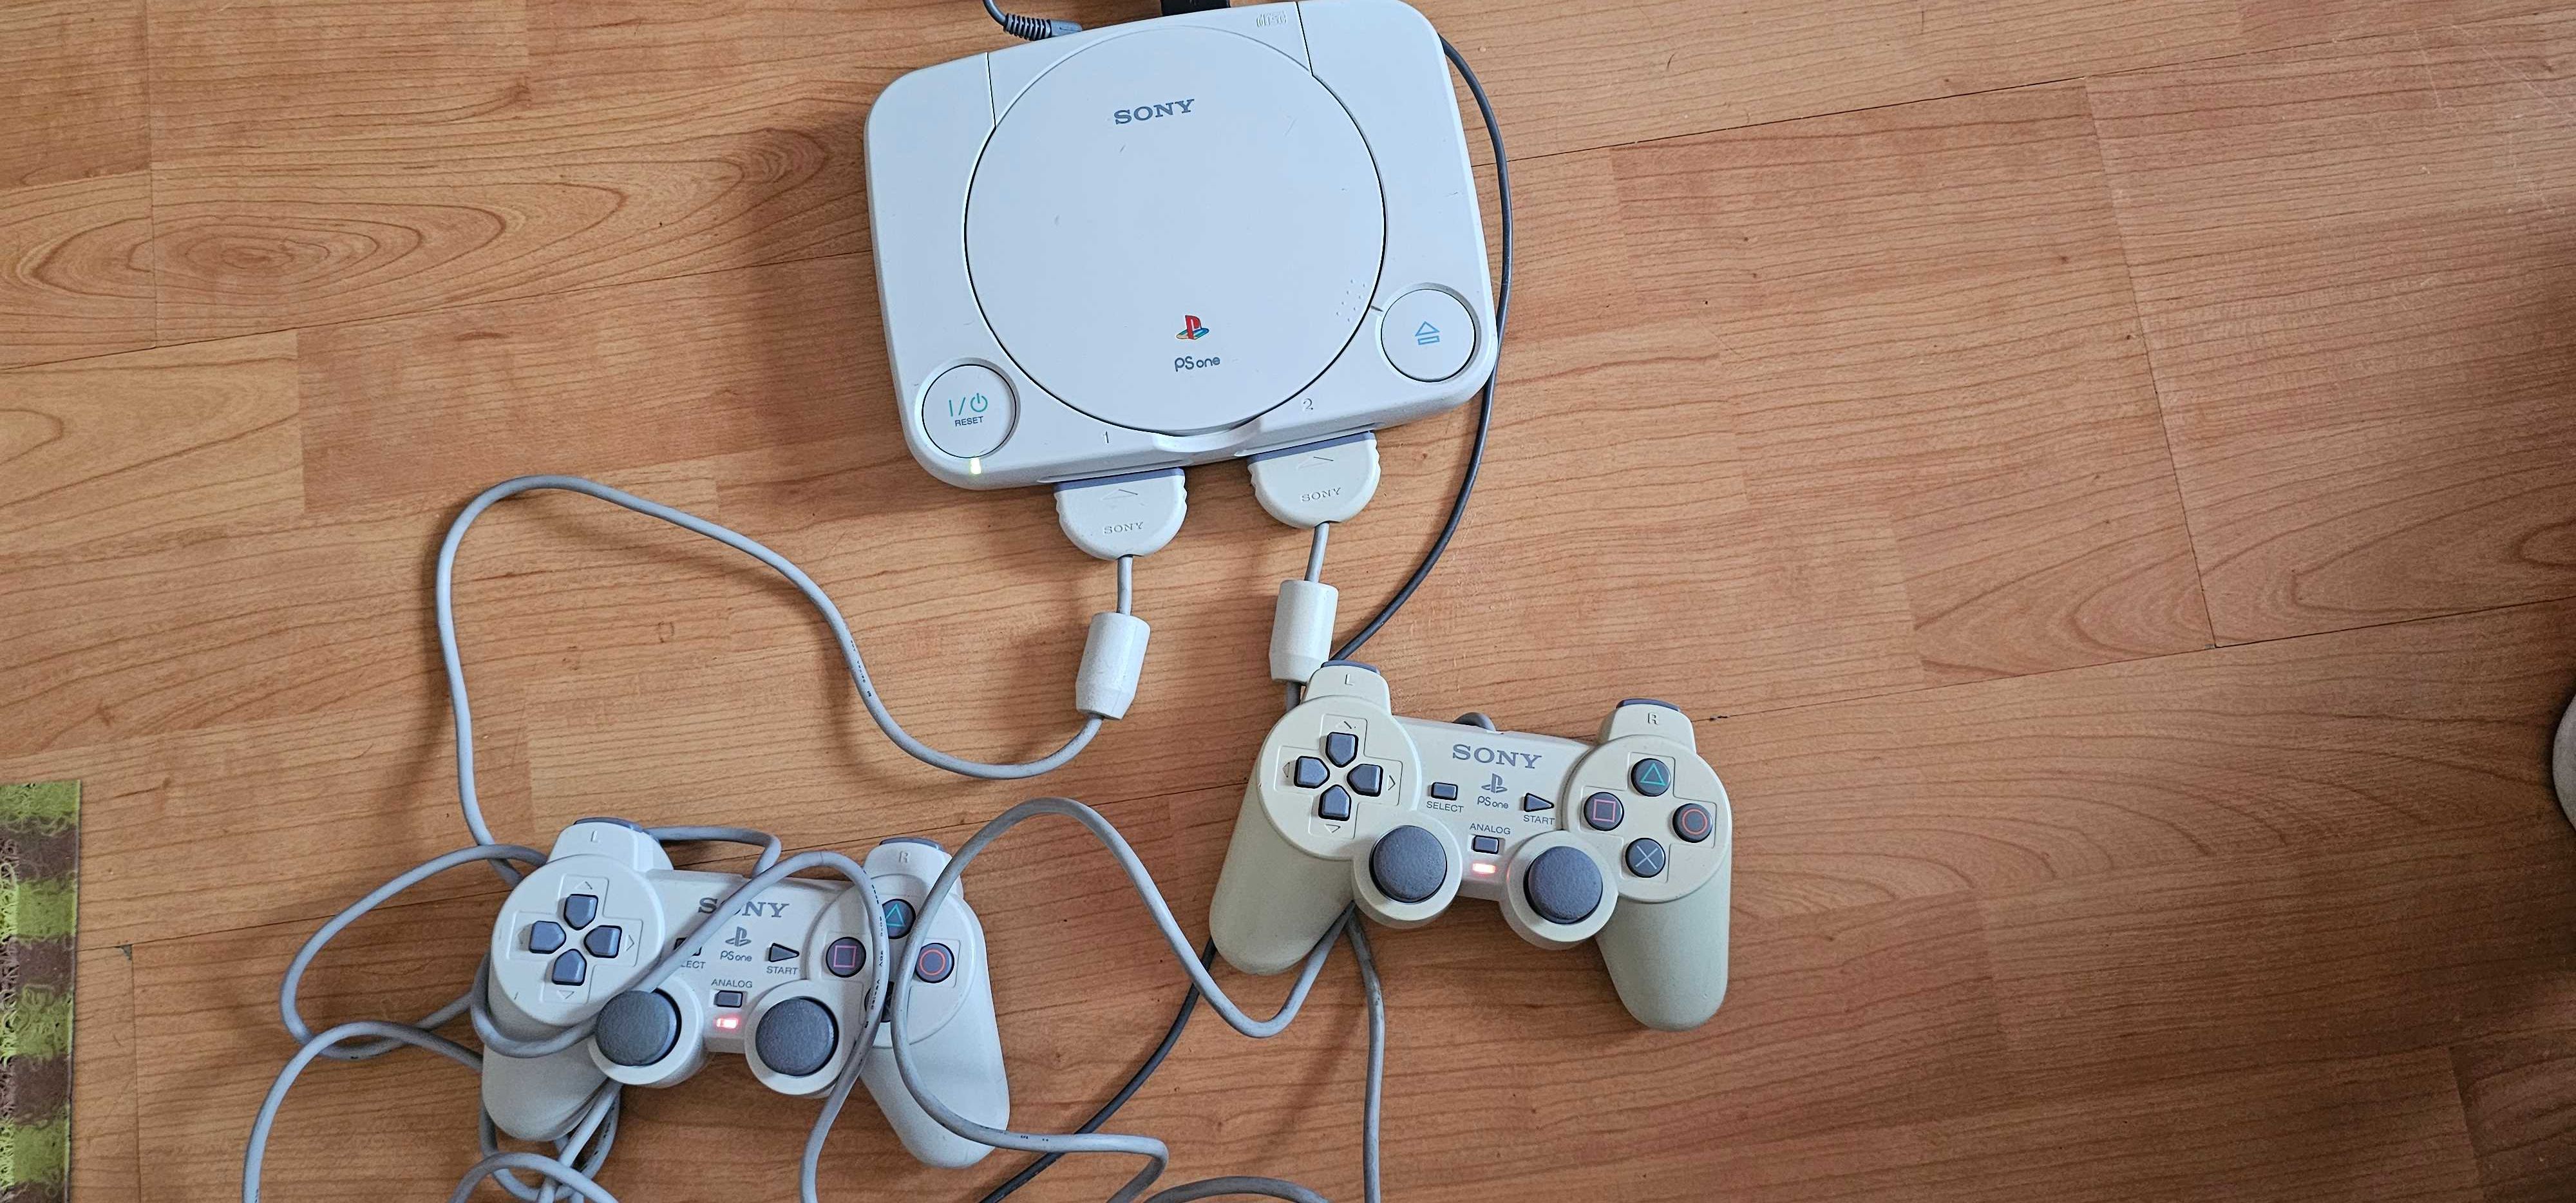 consola playstation one ps one